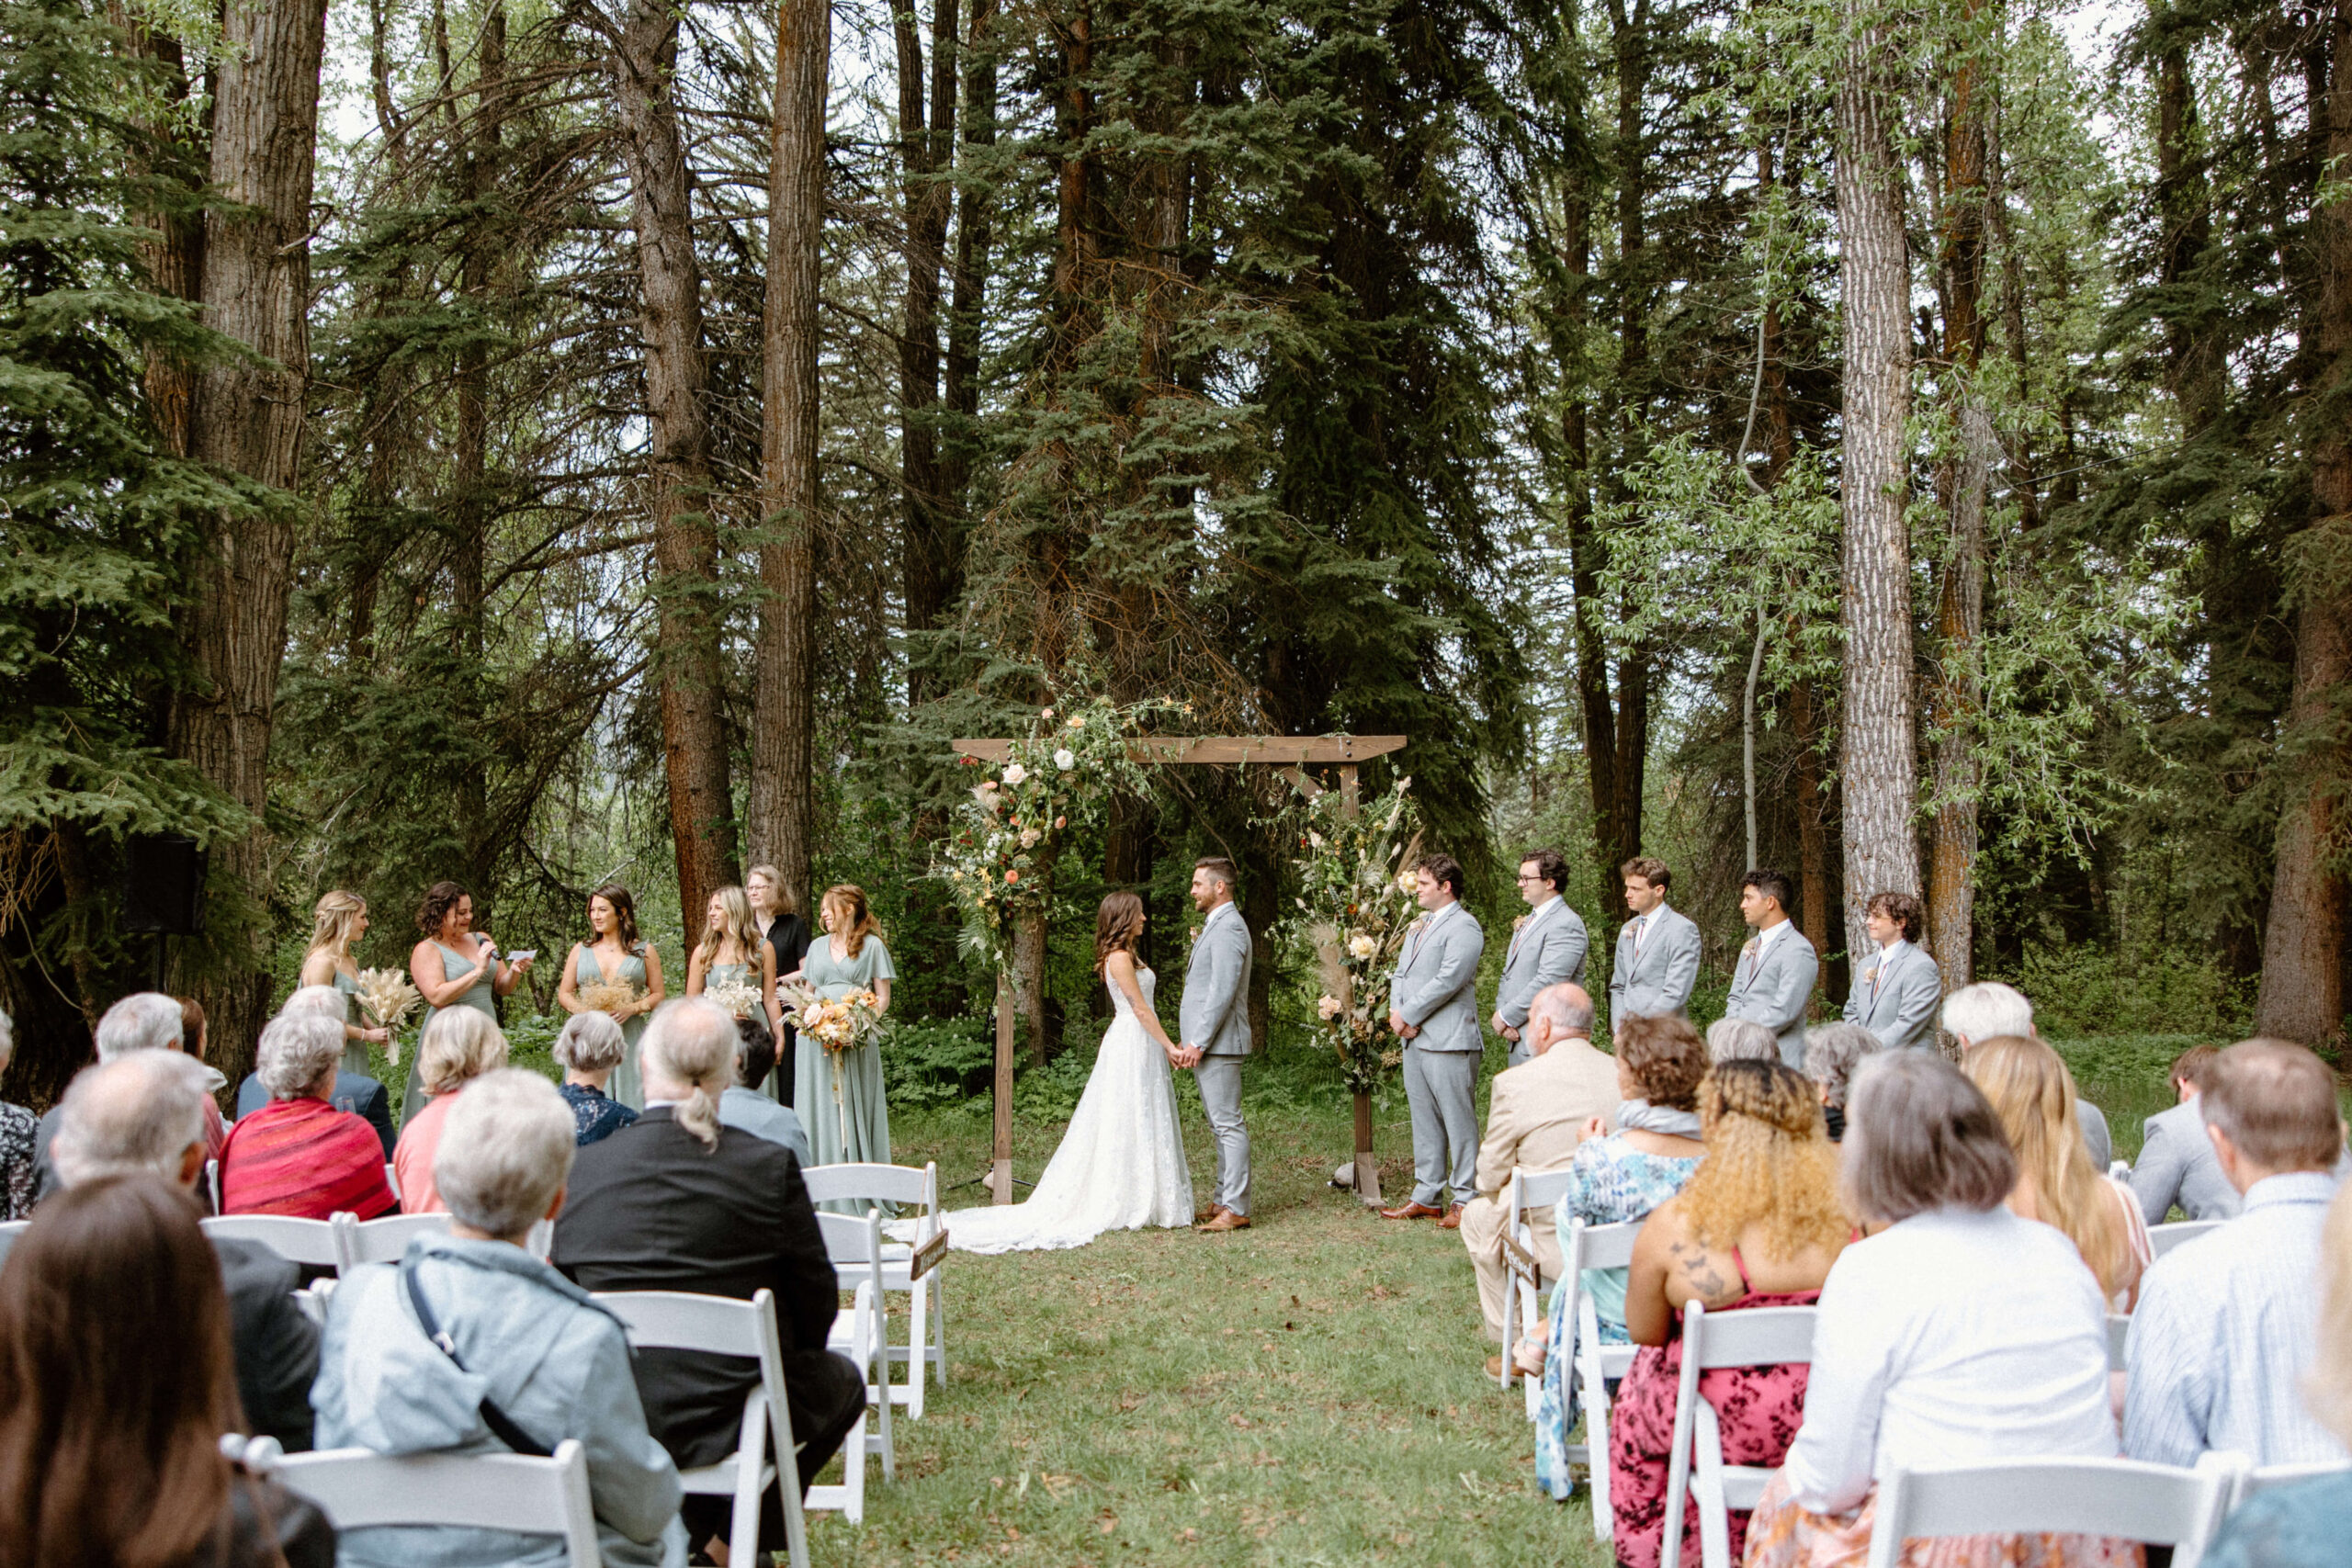 Wedding ceremony in the forest in Colorado